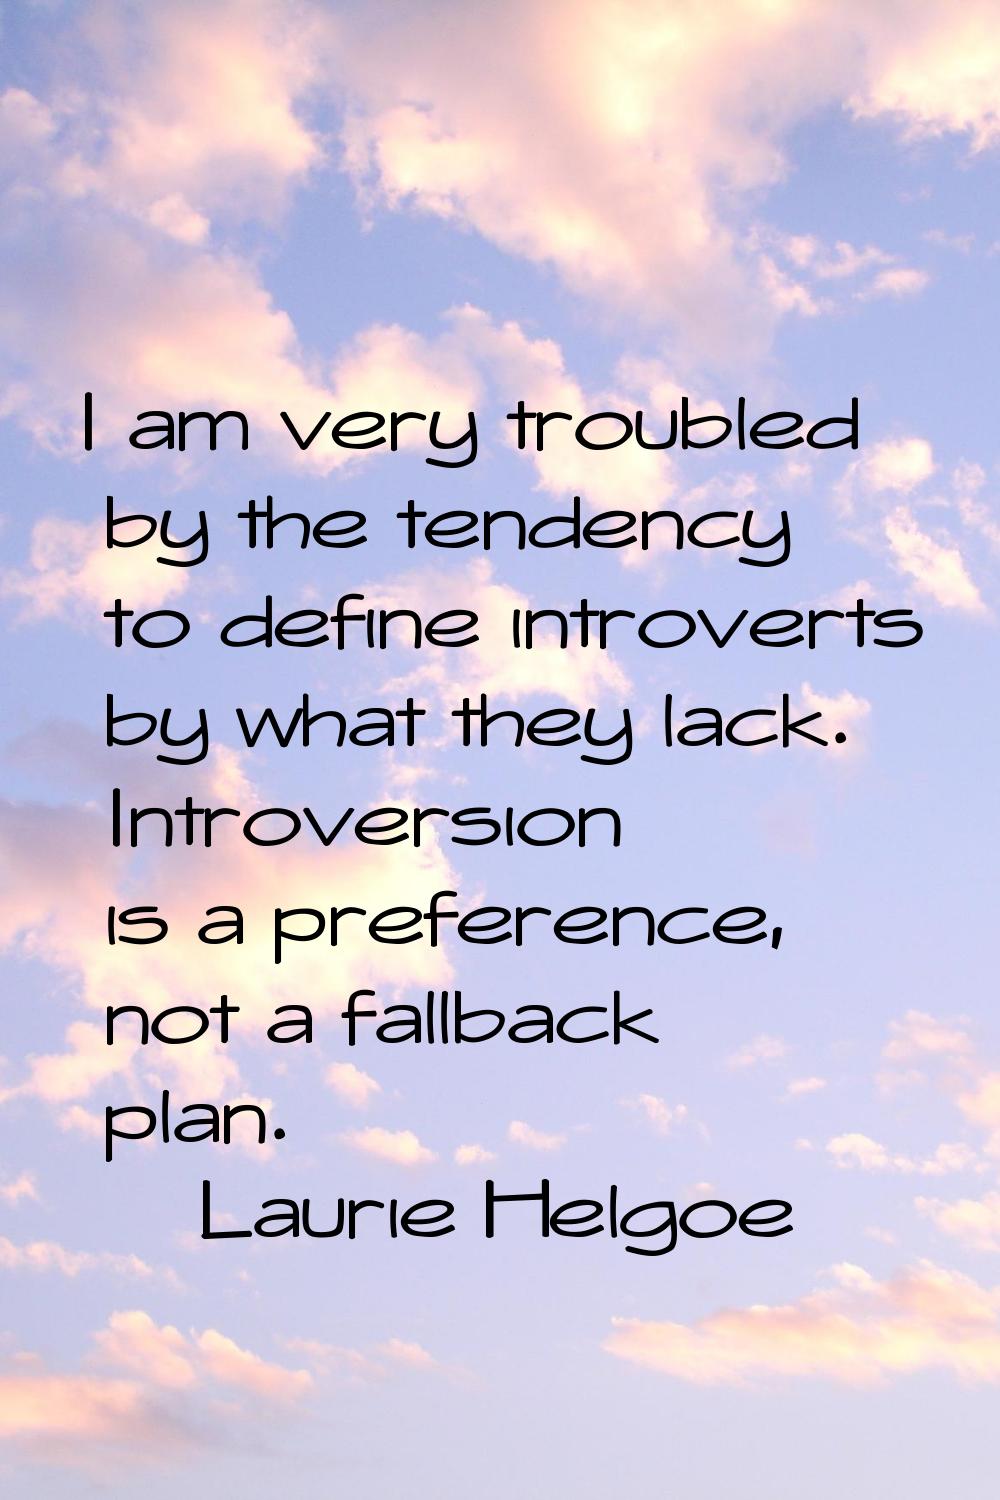 I am very troubled by the tendency to define introverts by what they lack. Introversion is a prefer